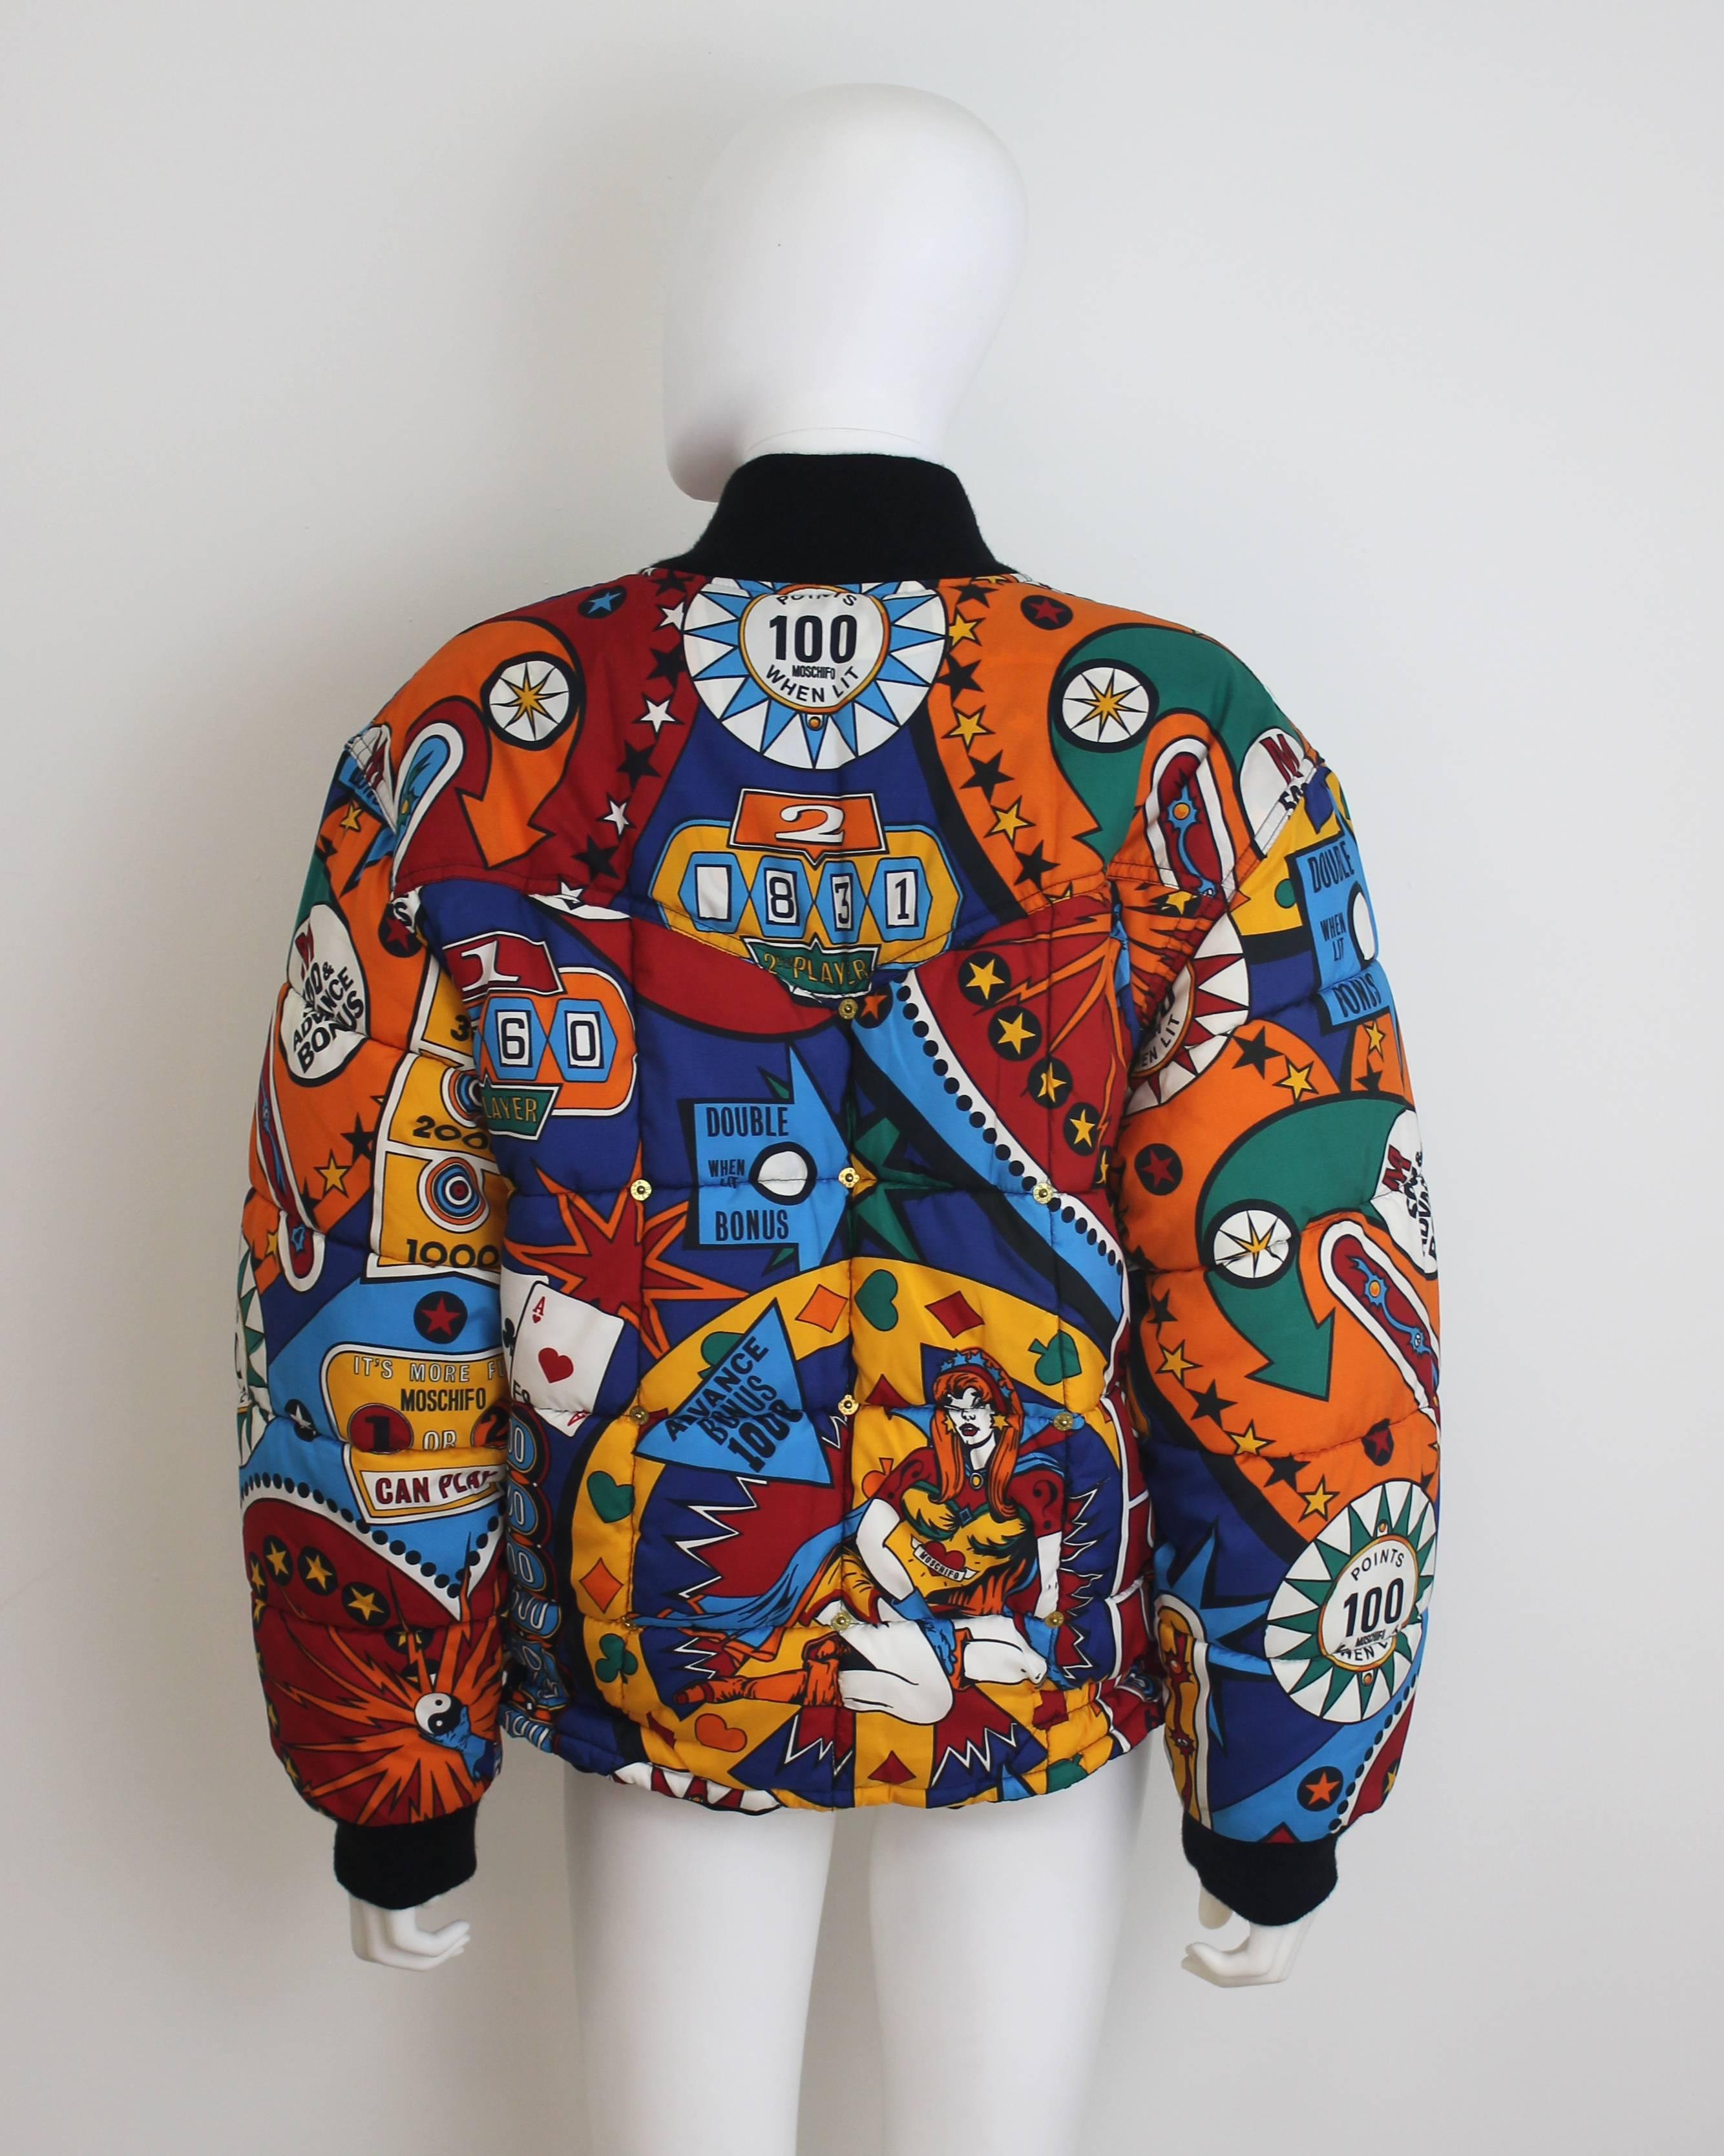 Iconic Moschino Jeans 1990s bomber jacket with a colourful pin-ball print. Features a heart shaped zipper-tab and metal popper details. 